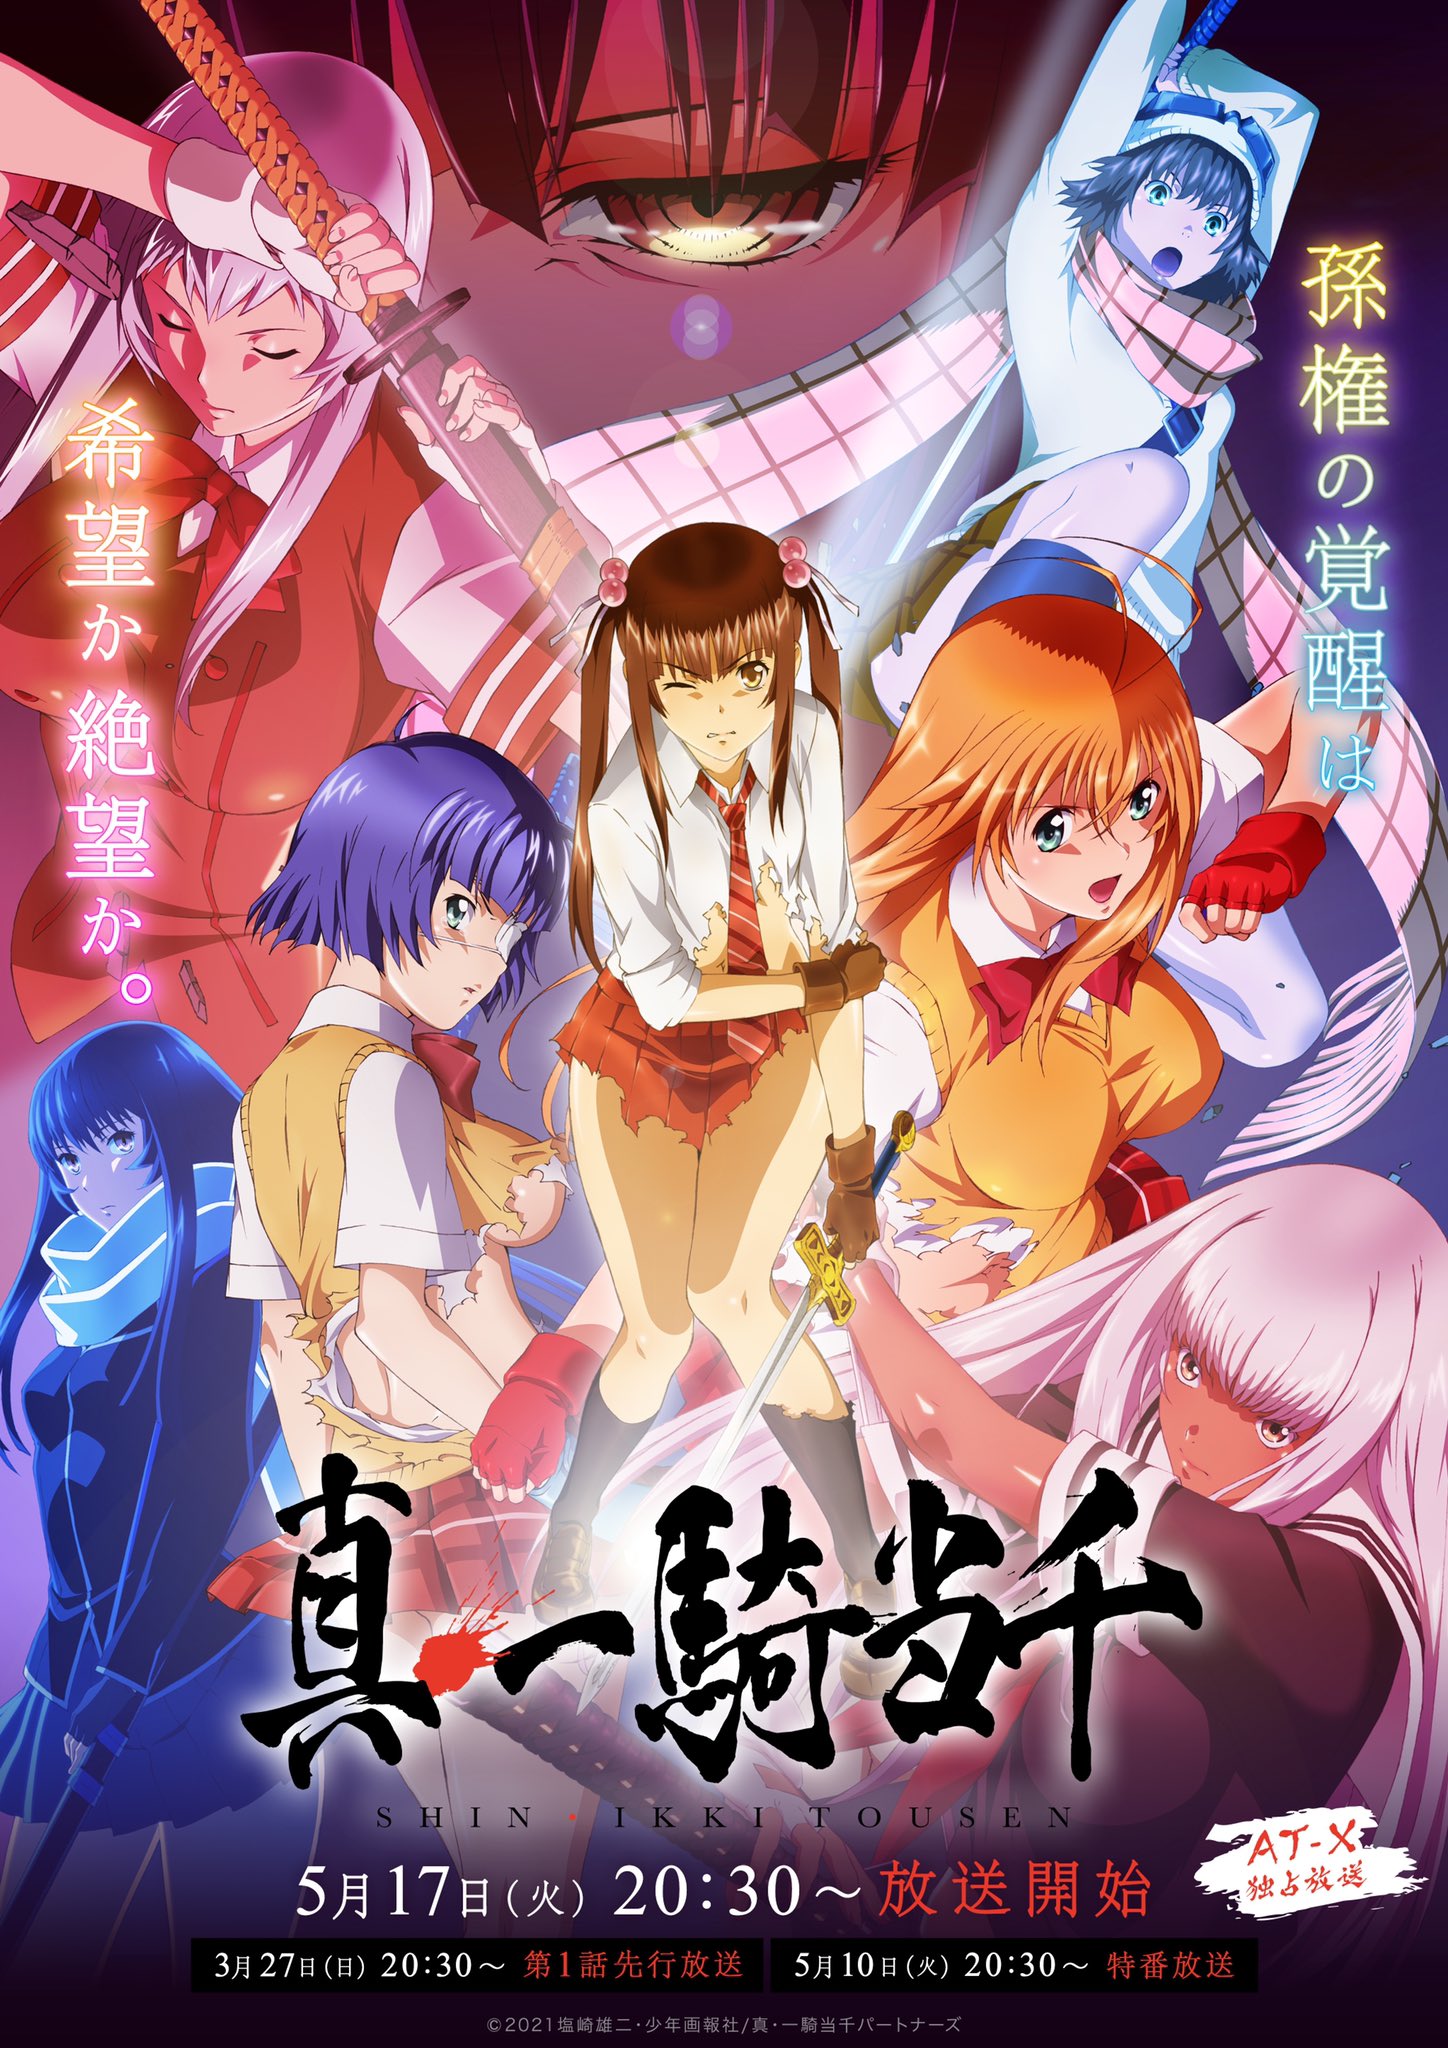 🇼🇸/🇦🇸 Geoff Bisente 🇵🇭 on X: #IkkiTousen: Extravaganza Epoch,  Western Wolves #1, & Shin Ikki Tousen are all out on @Crunchyroll! I had  the privilege to Direct all 3 OVAs as well